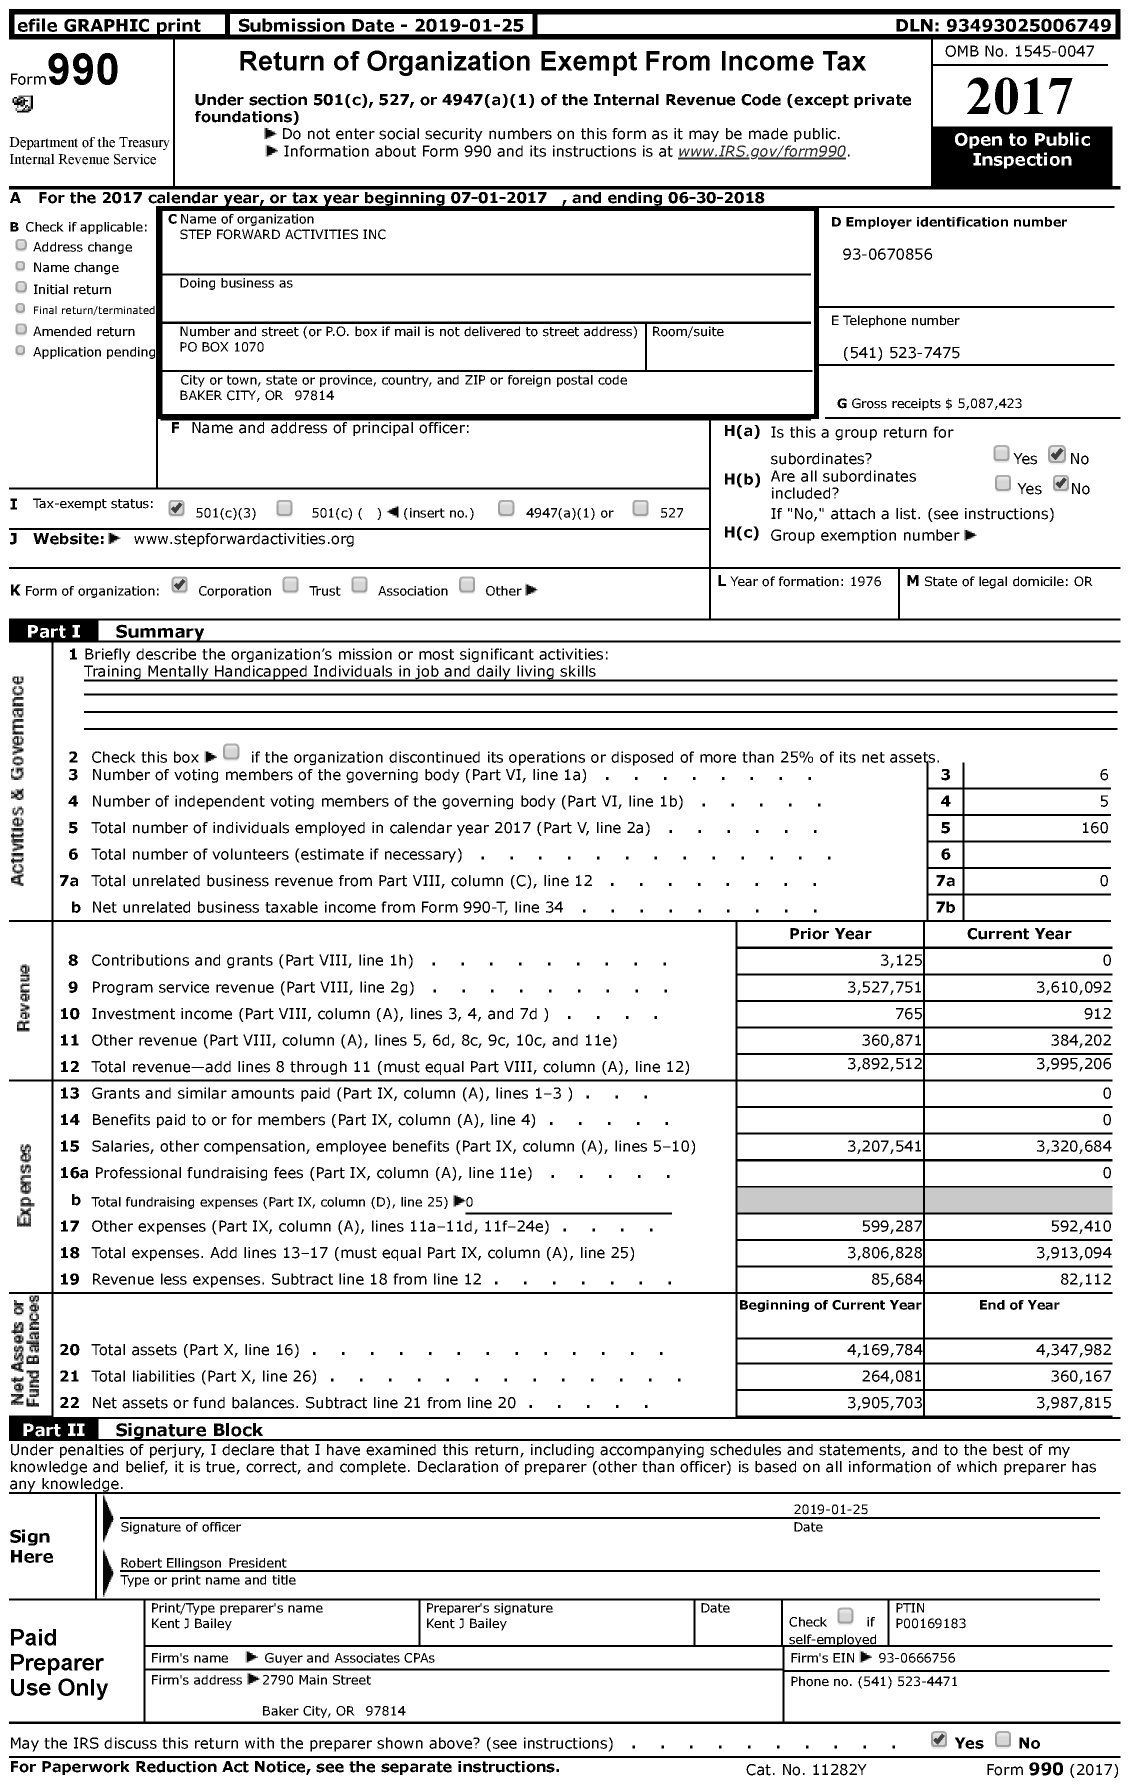 Image of first page of 2017 Form 990 for Step Forward Activities